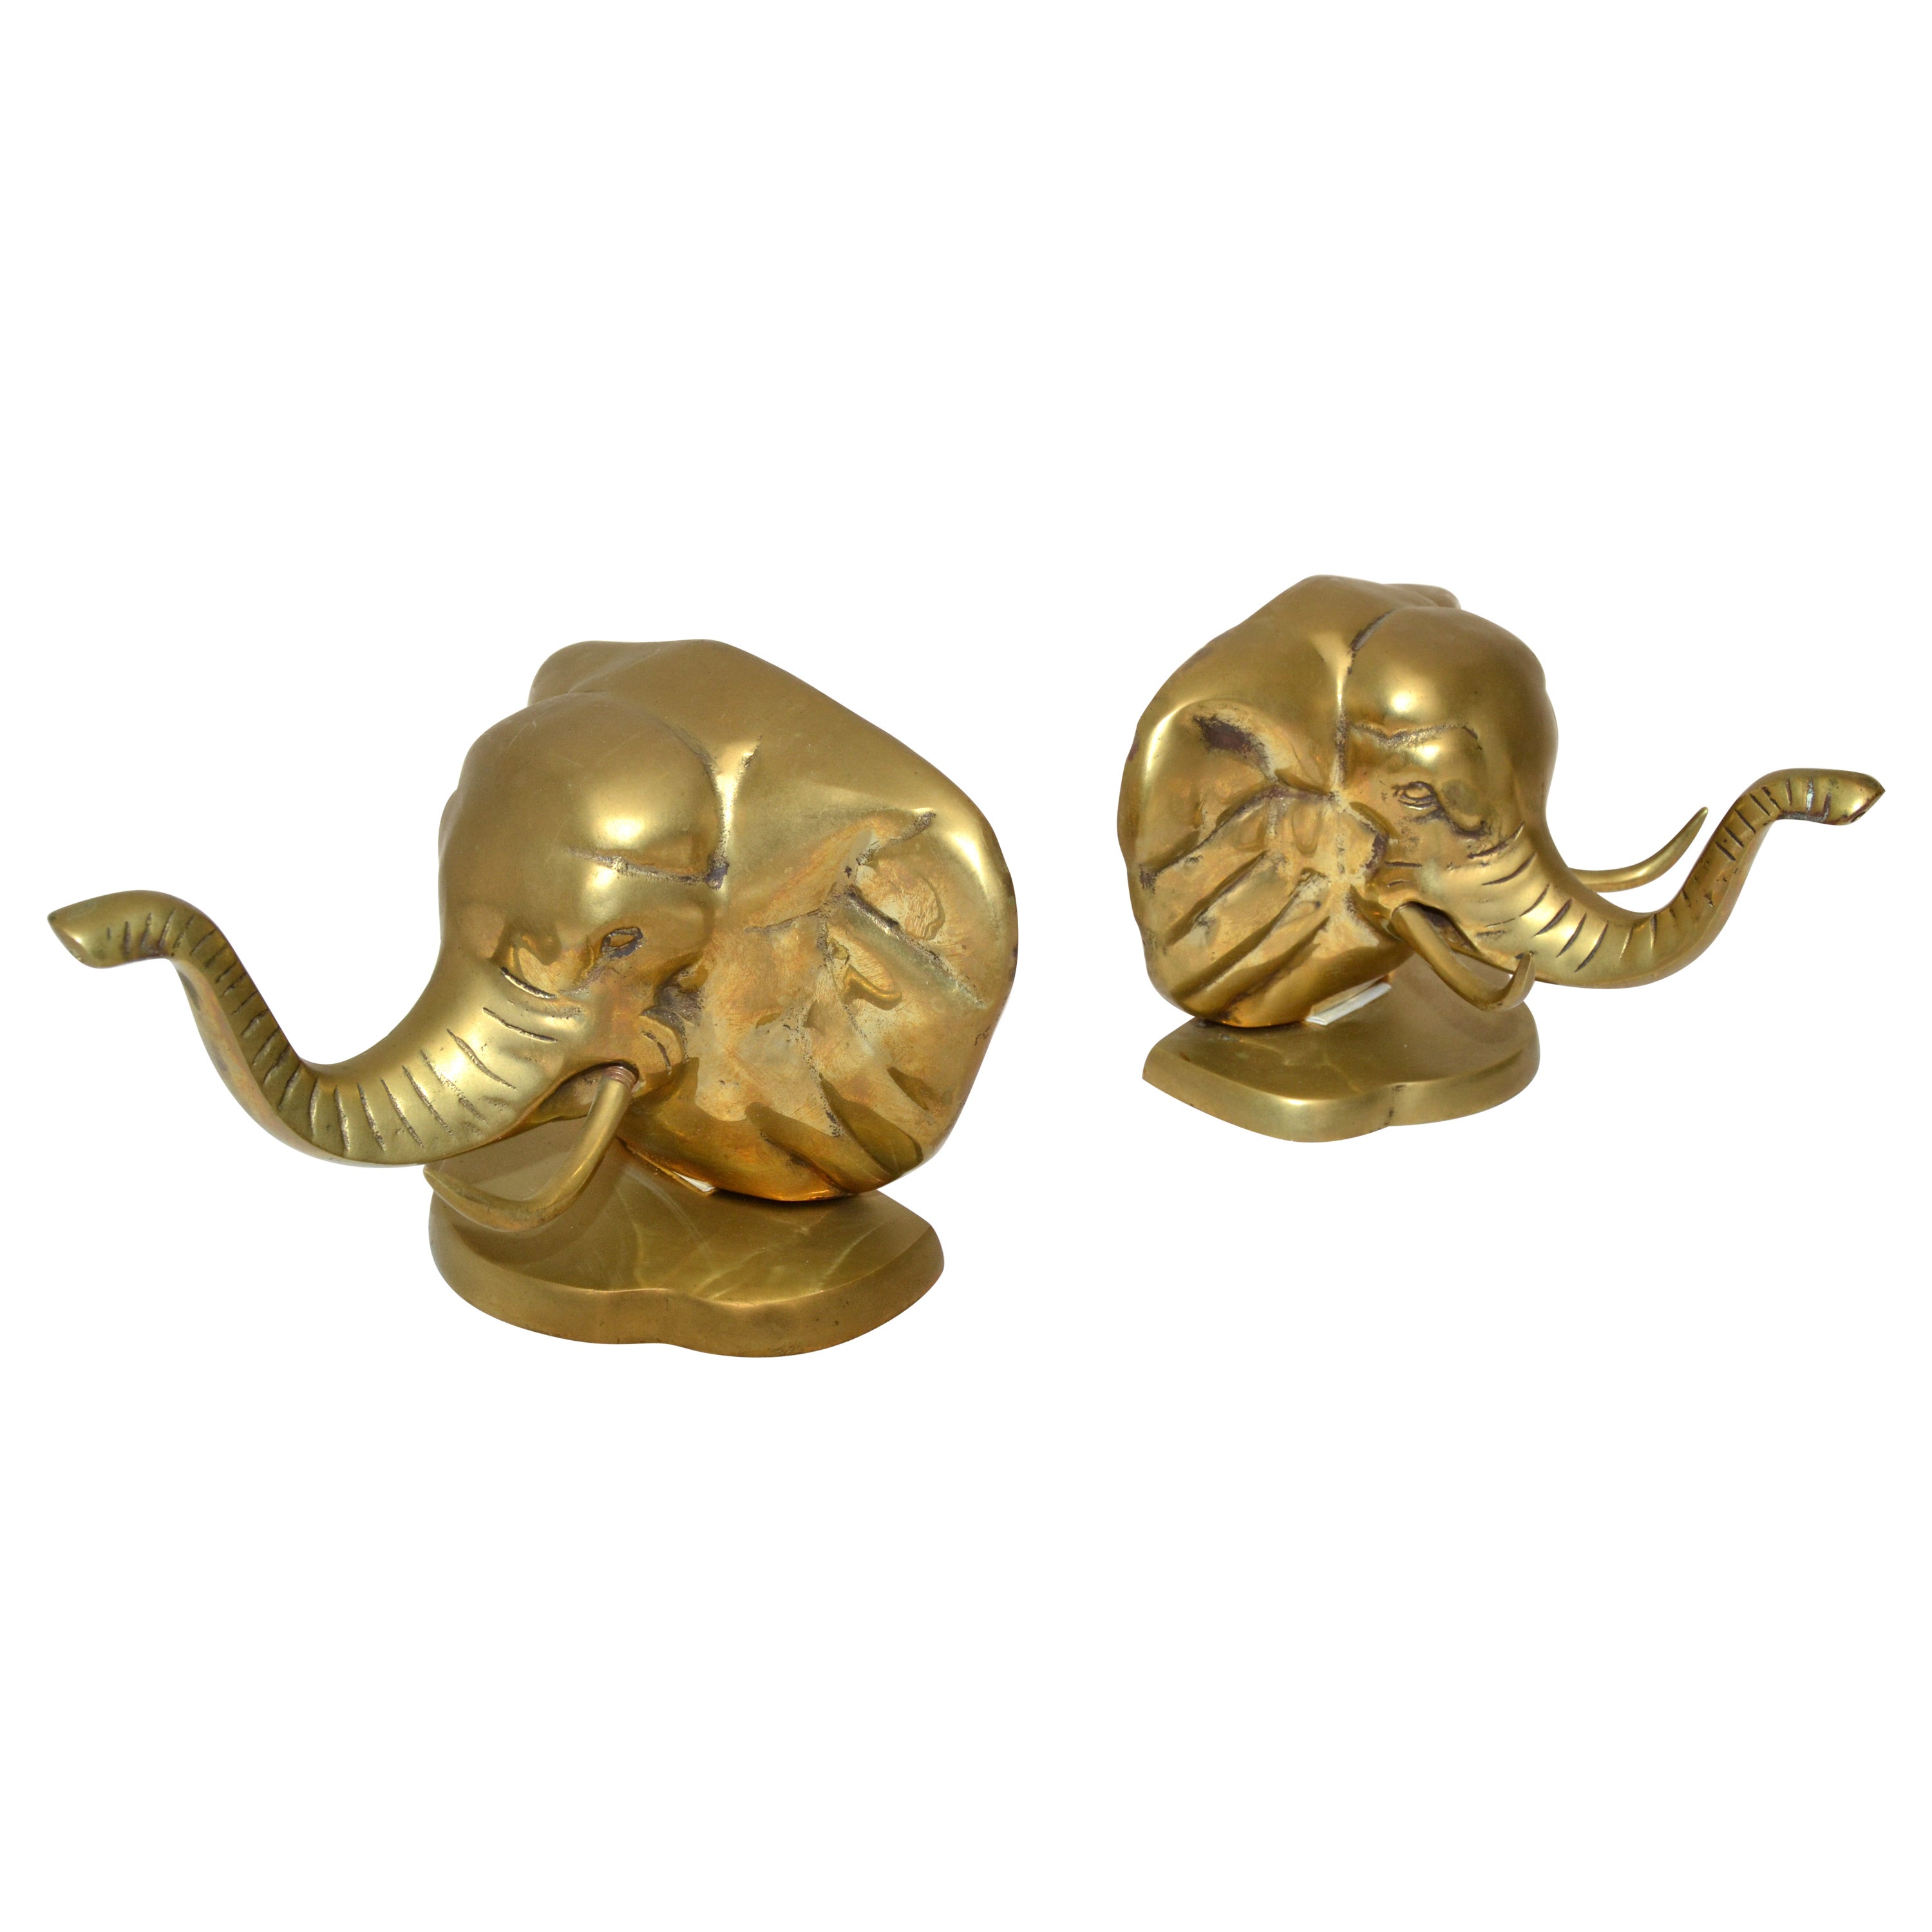 Vintage Handcrafted Brass Elephant Head Bookends, Pair For Sale